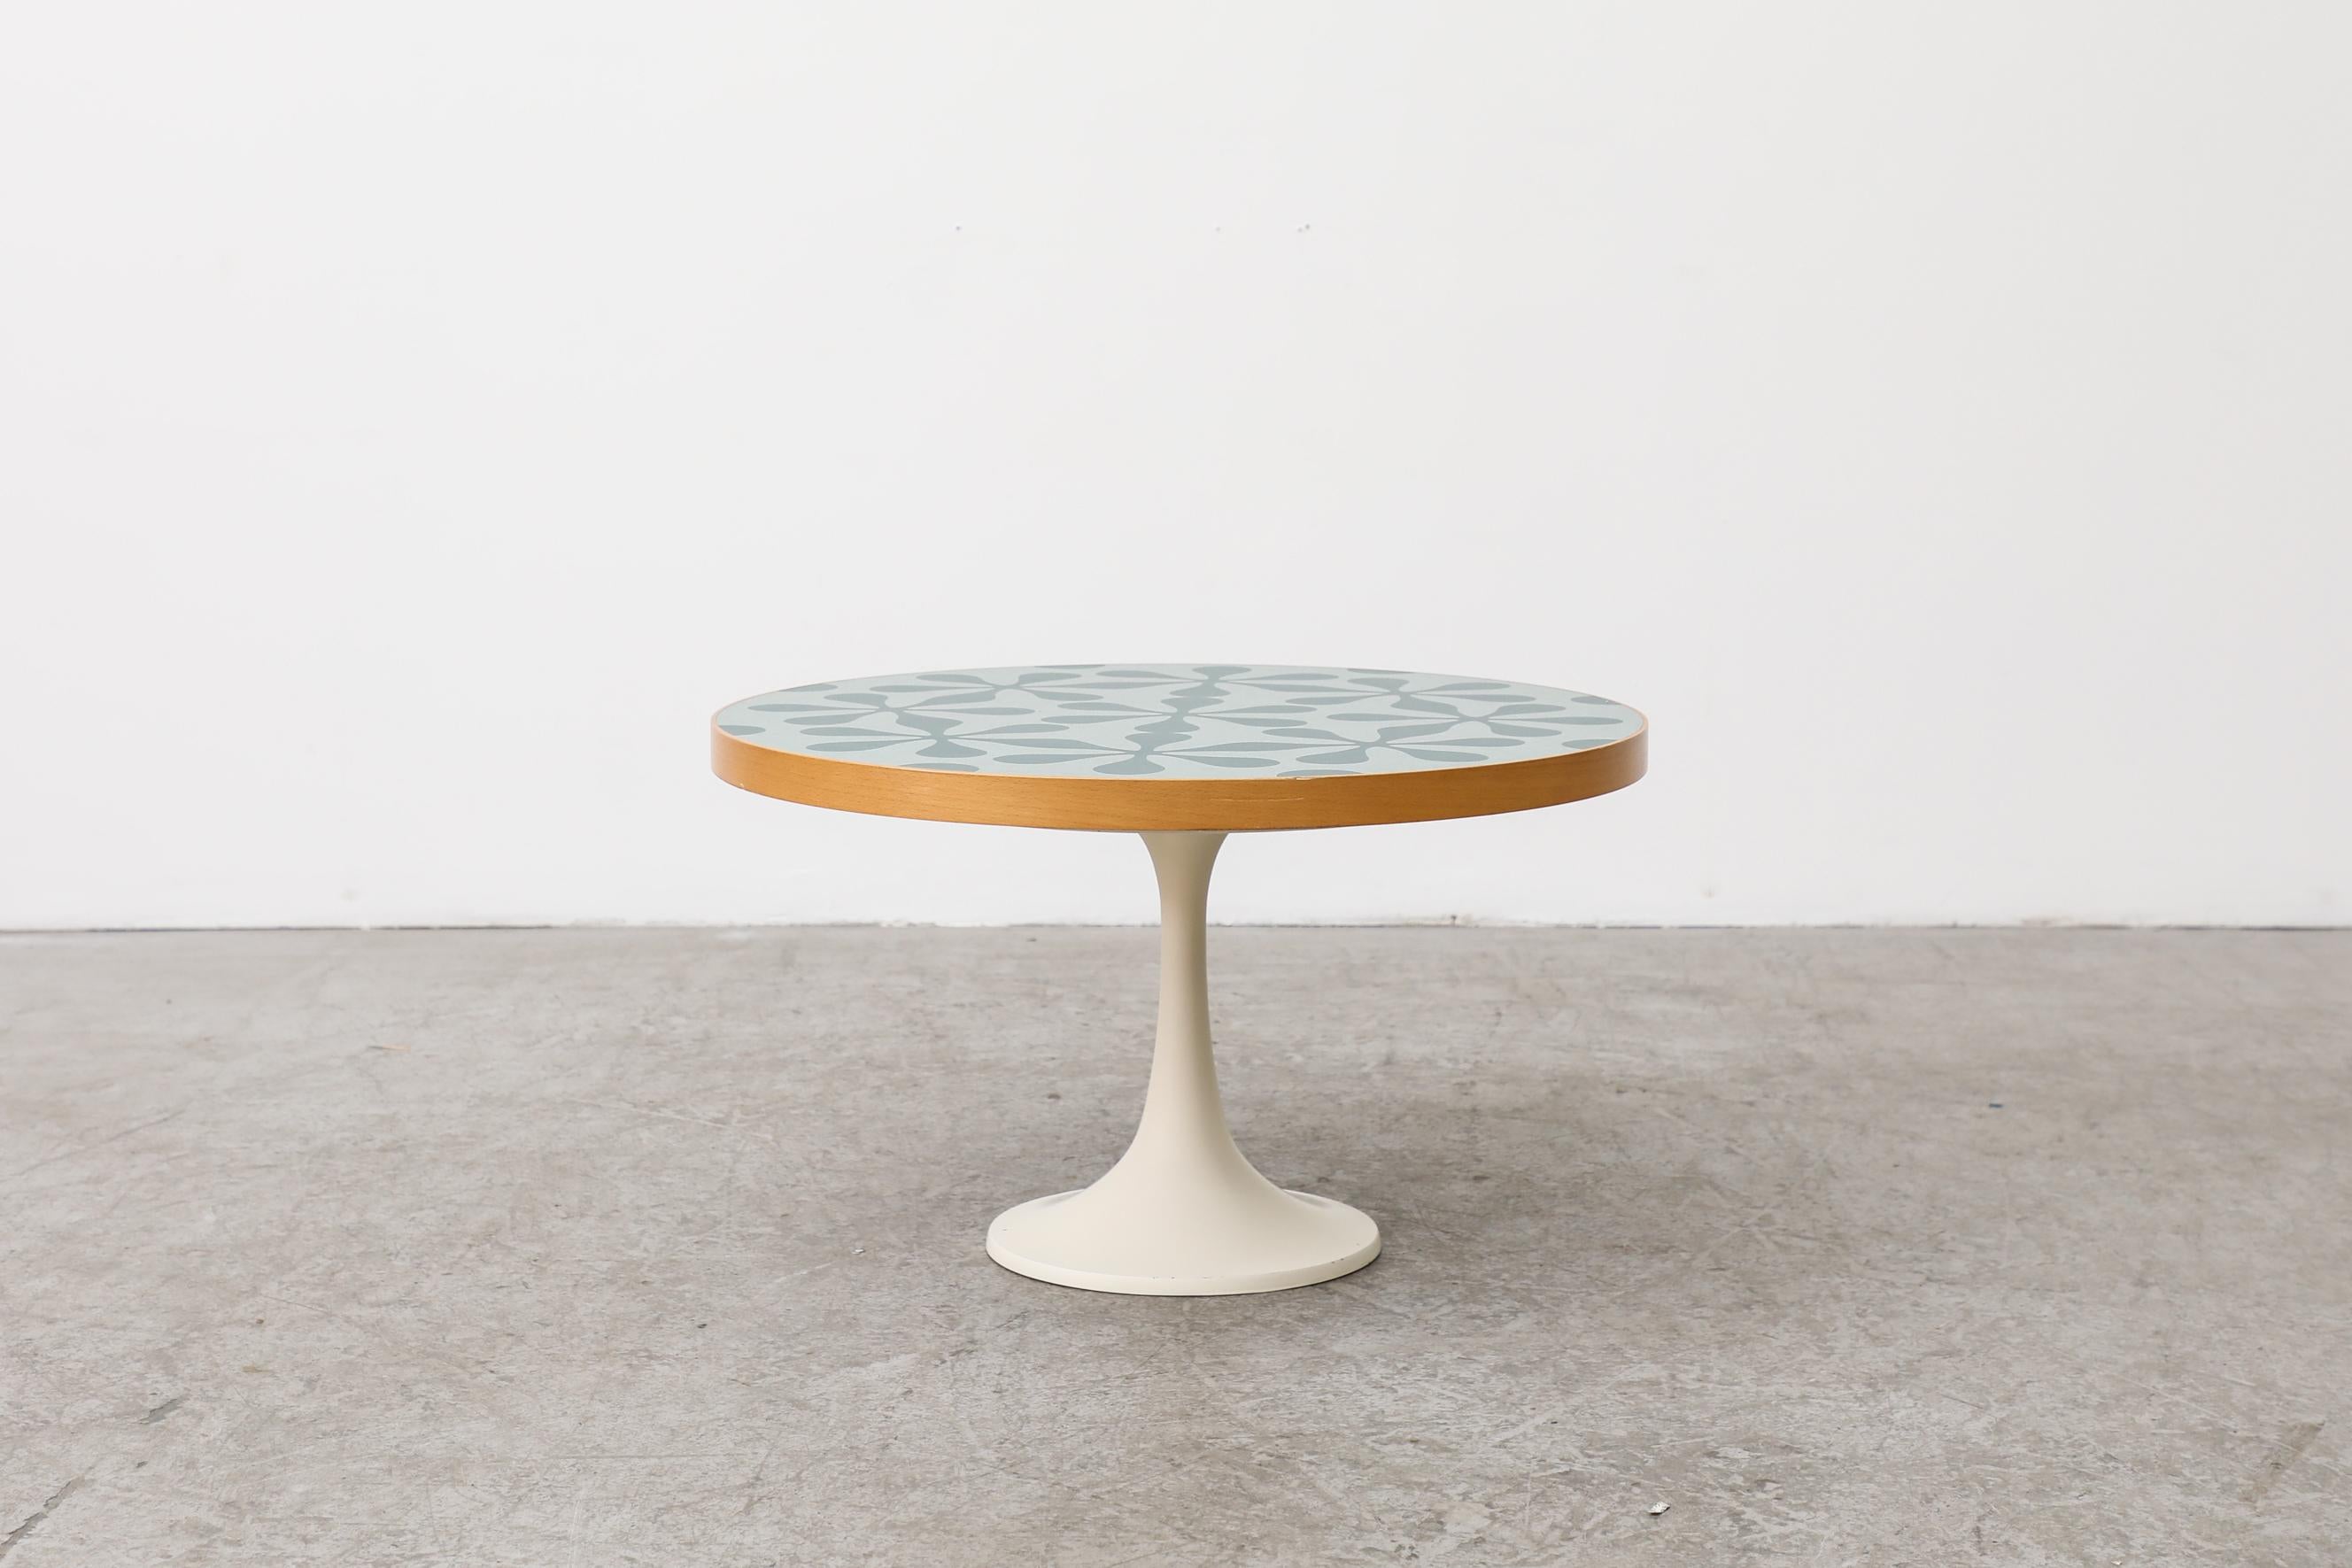 Retro table with teal flower print laminate table top, light wood edging and white enameled tulip base. A coffee or table or side table in original condition with normal wear for its age and use.